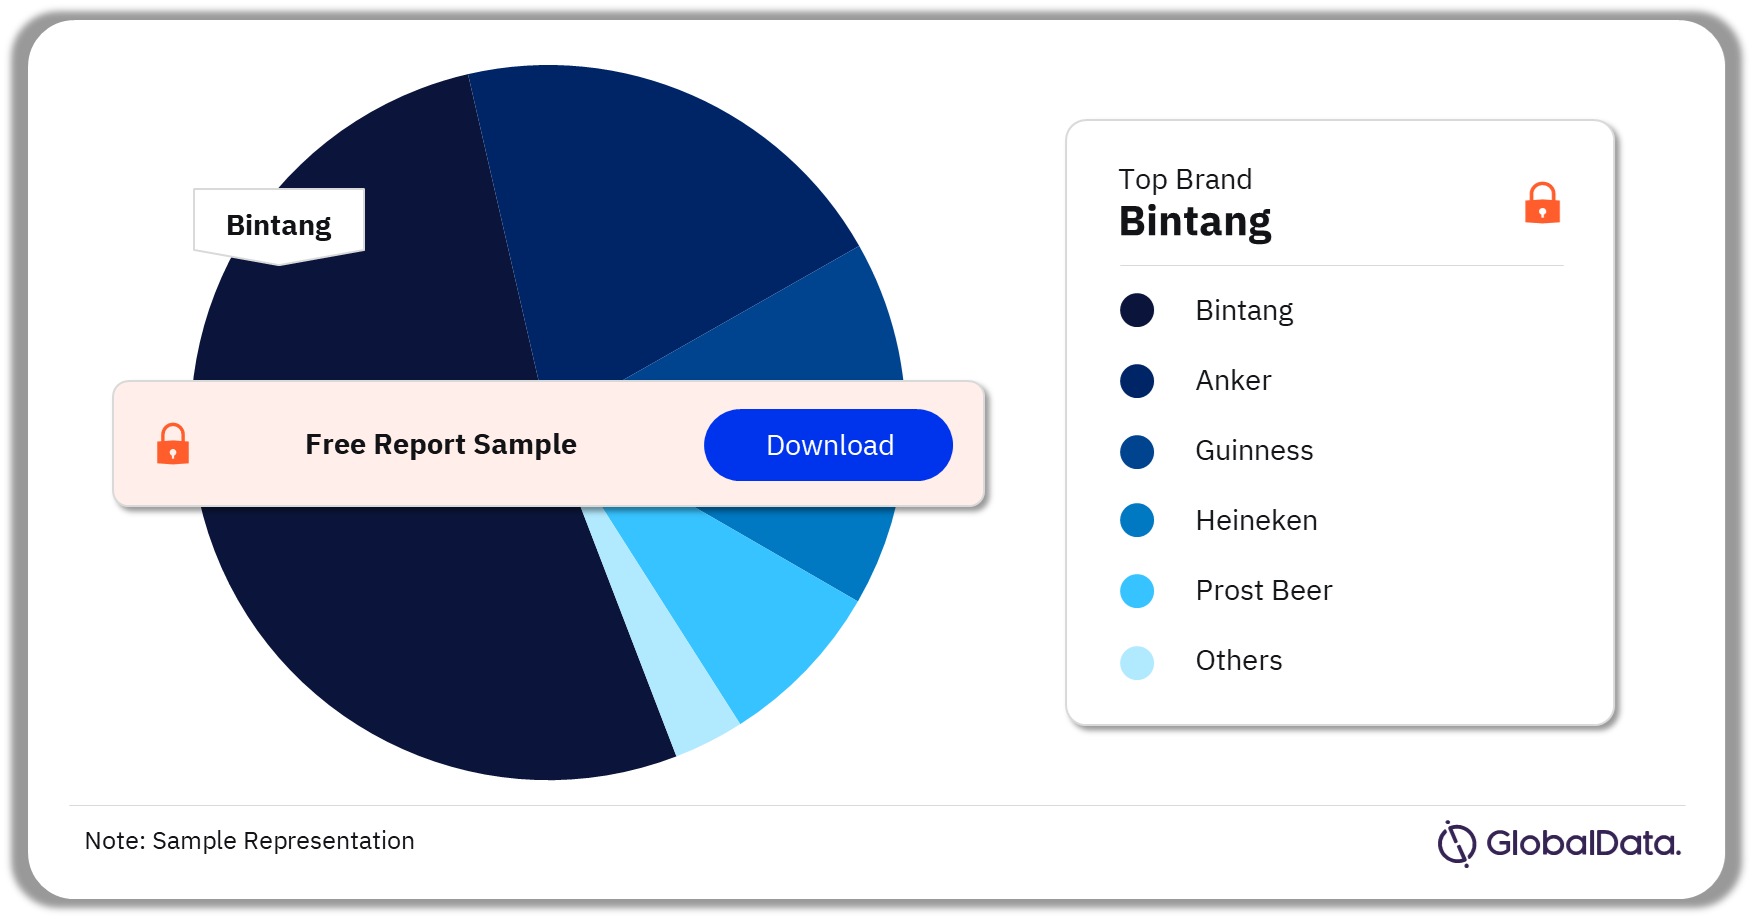 Indonesia Beer and Cider Market Analysis by Brands, 2022 (%)